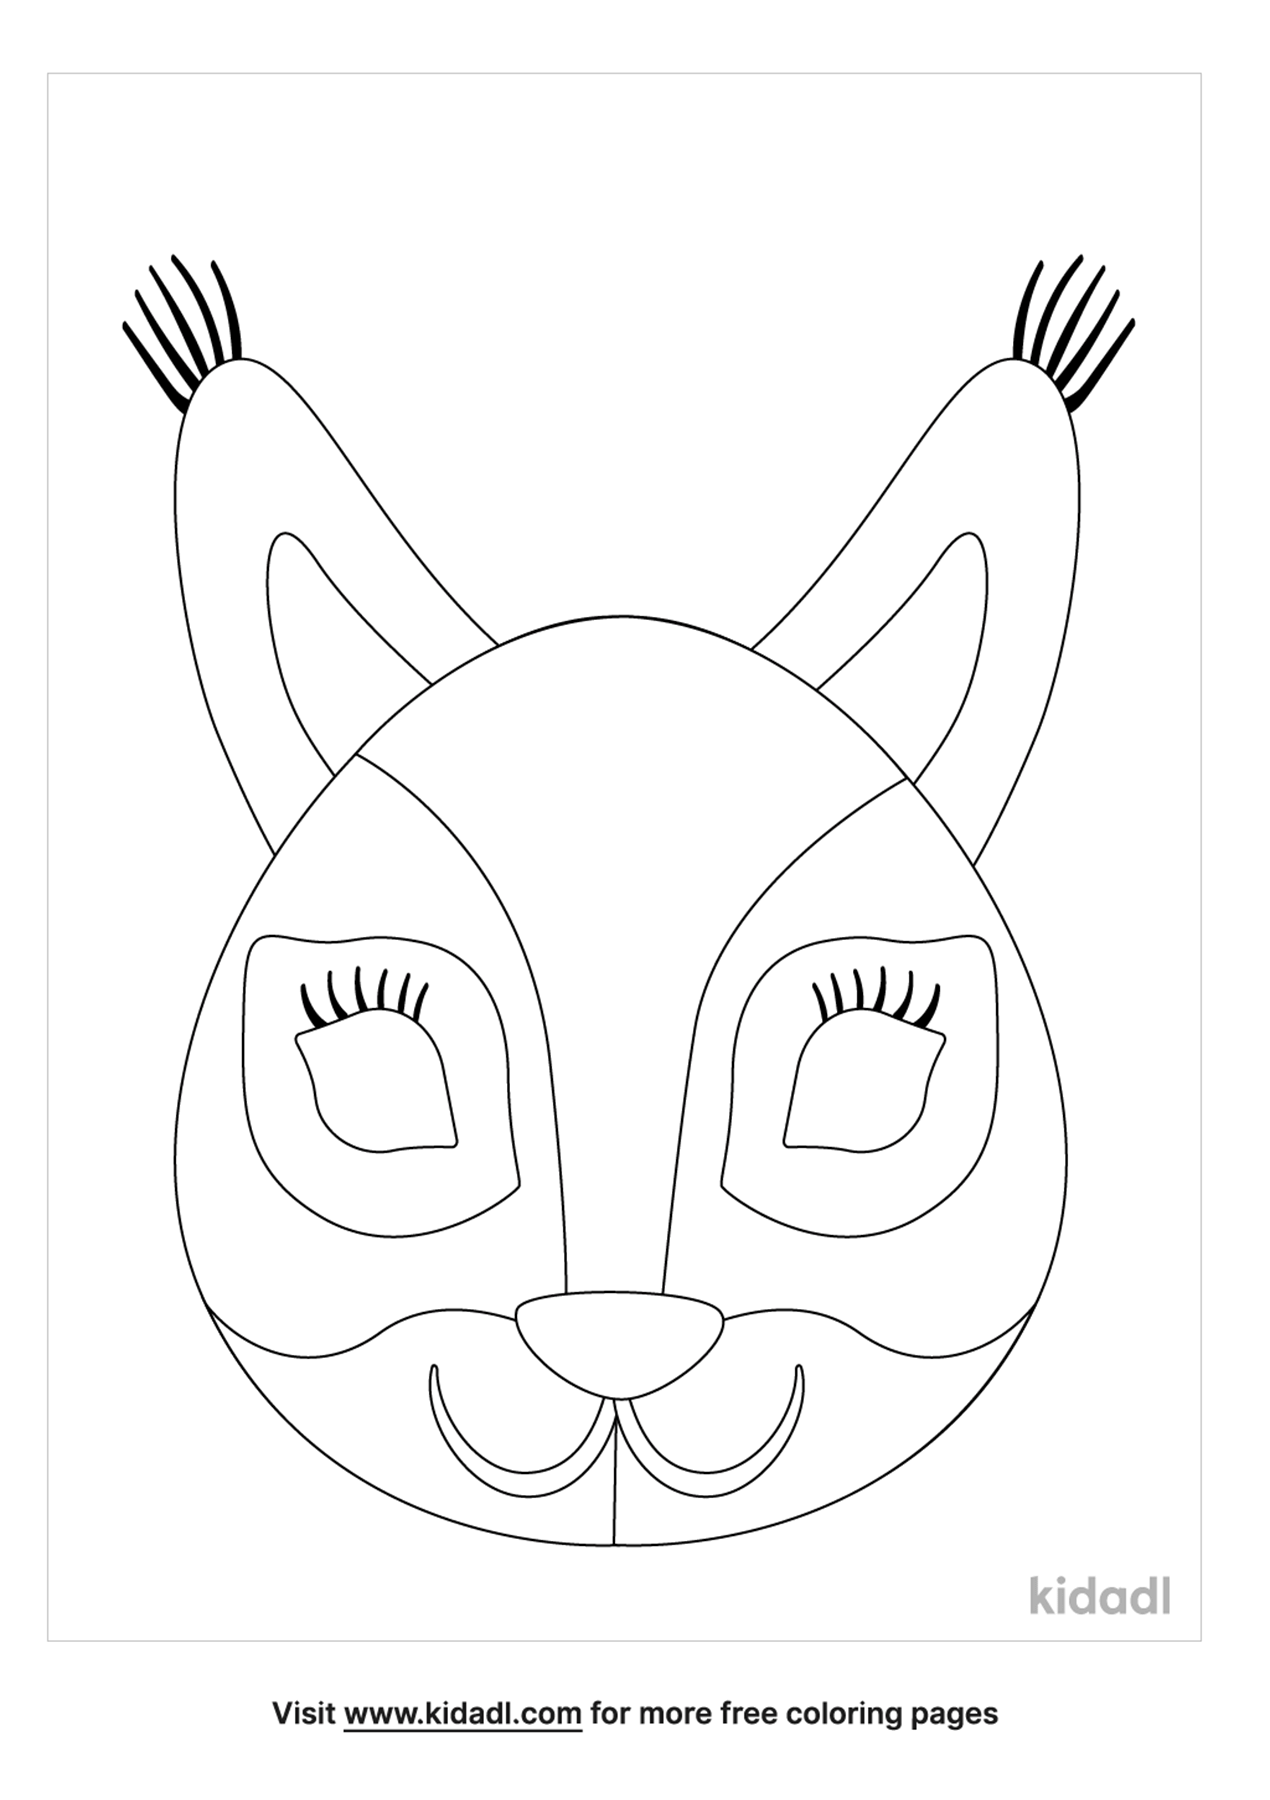 Squirrel Mask Template Coloring Pages | Free Animals Coloring Pages | Kidadl